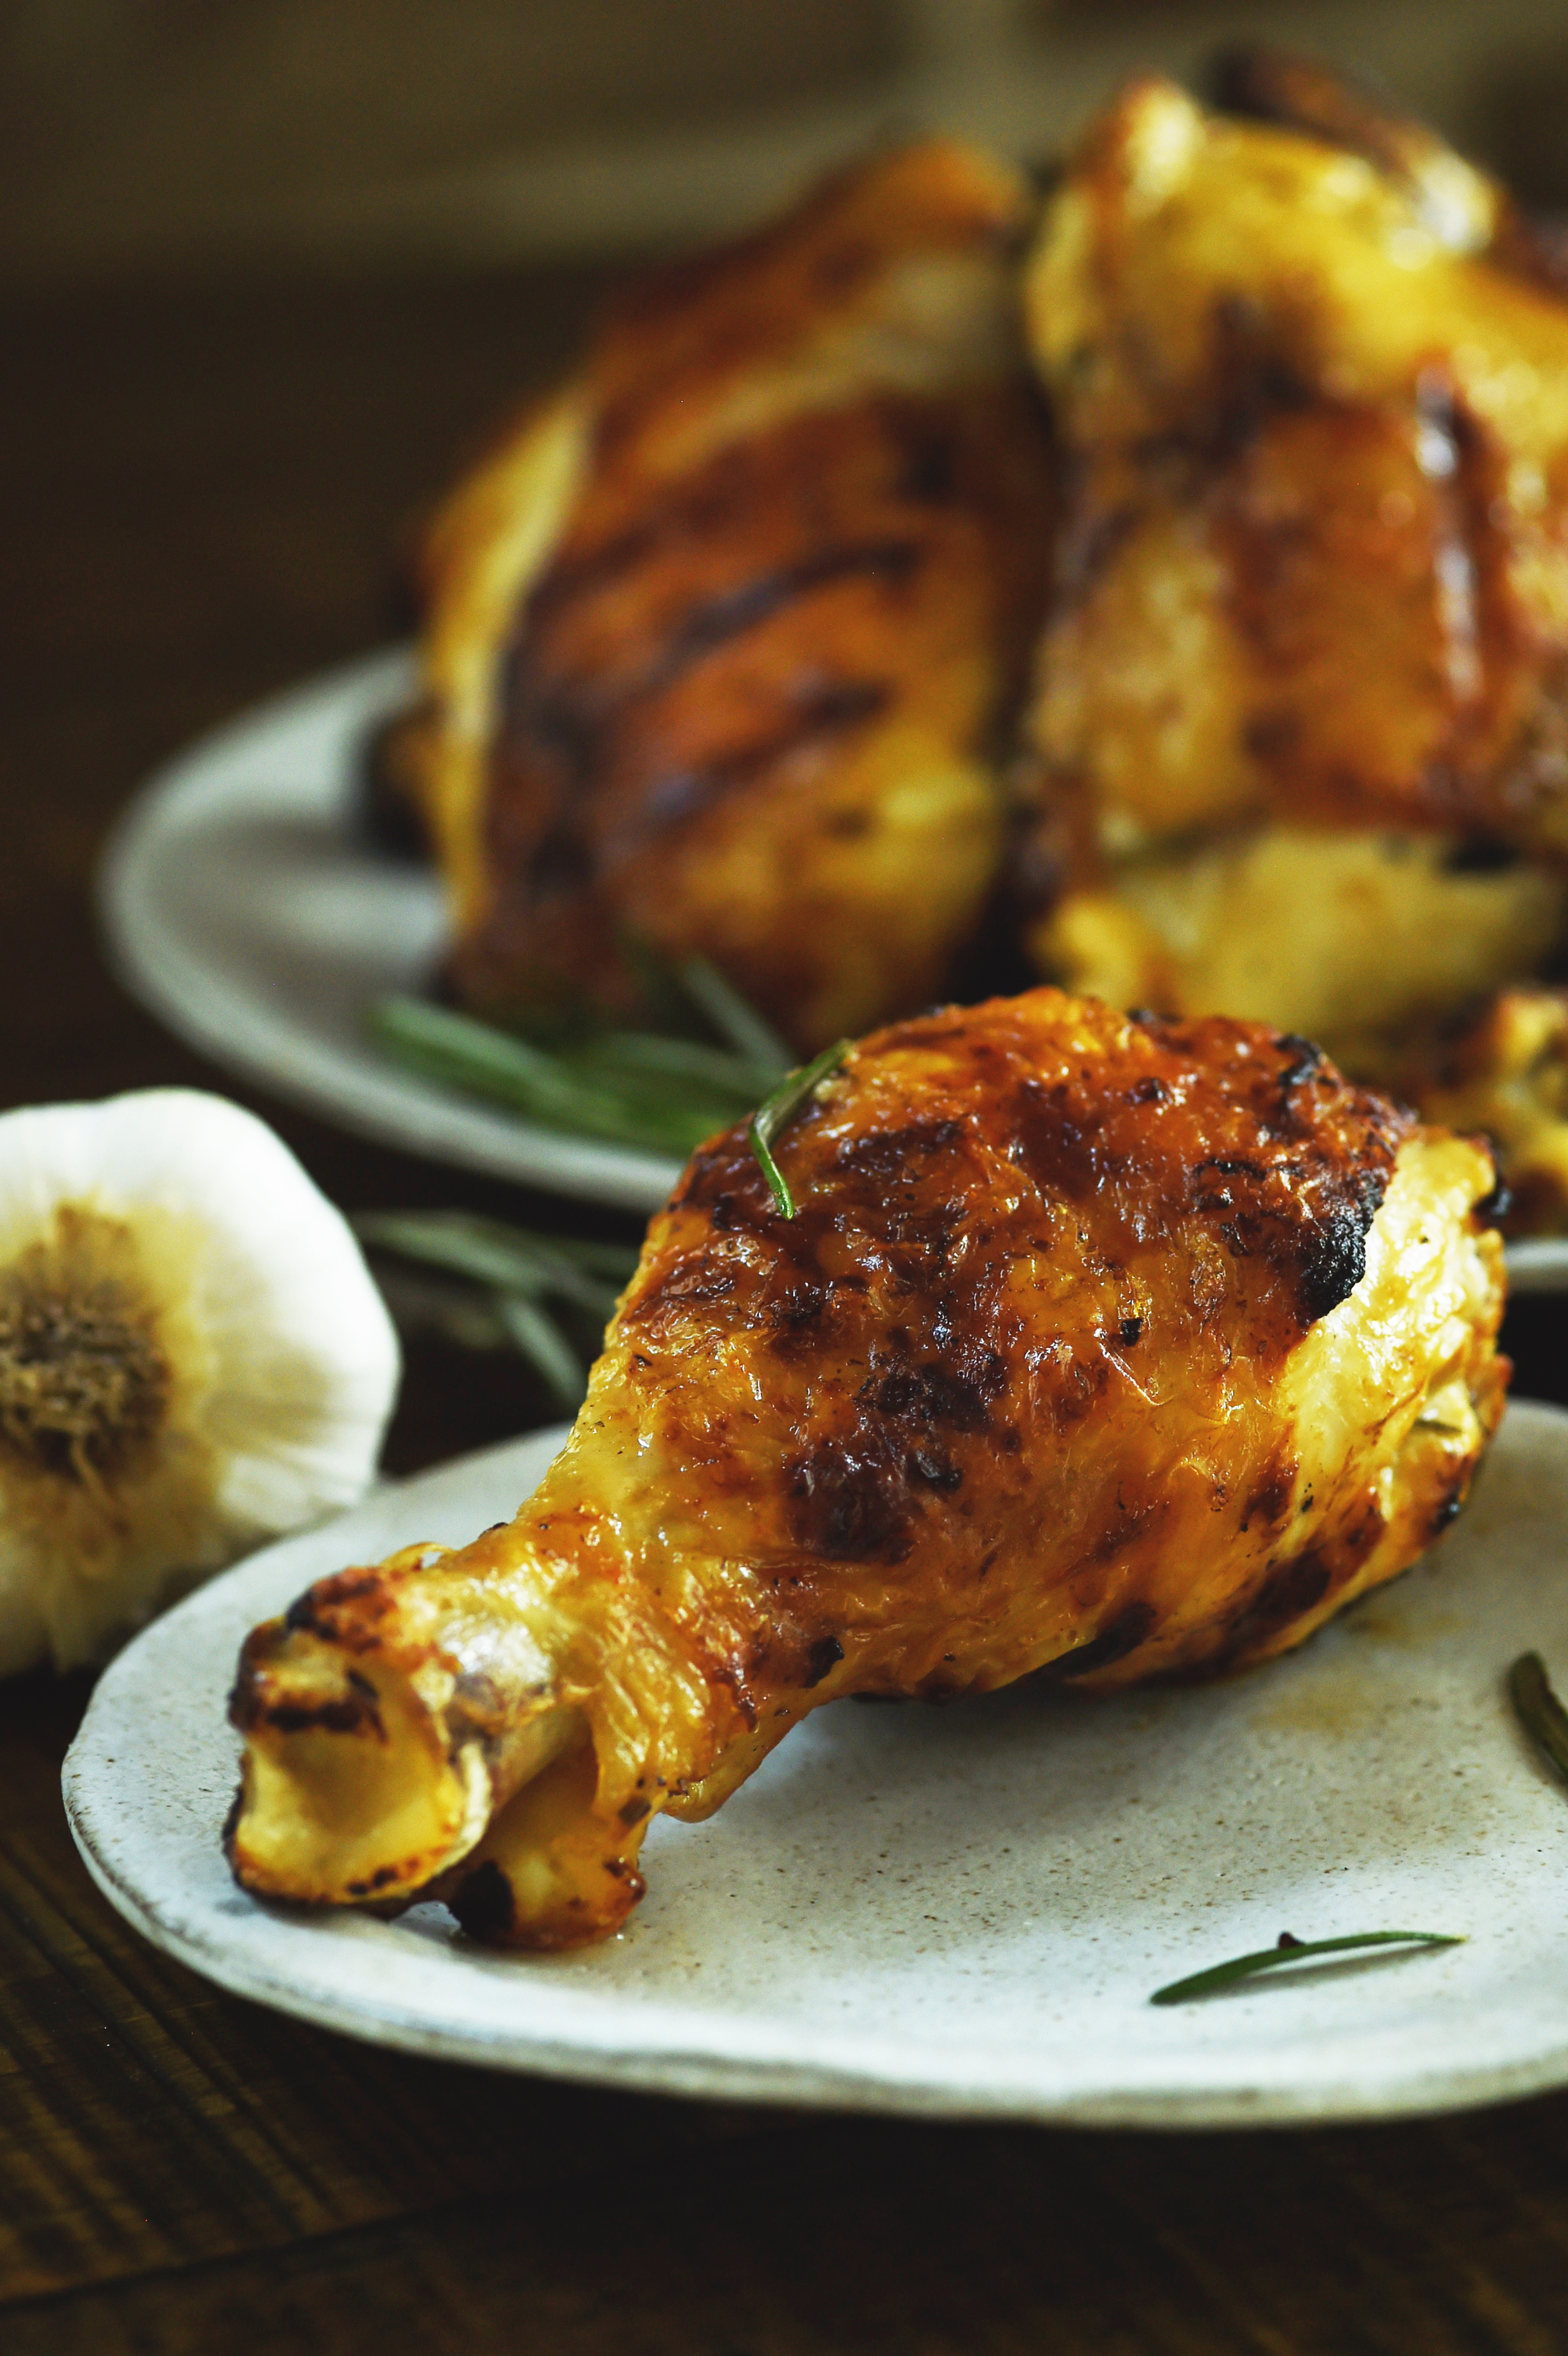 Grilled Rosemary Lemon Chicken -drumstick on a plate ready for eating.